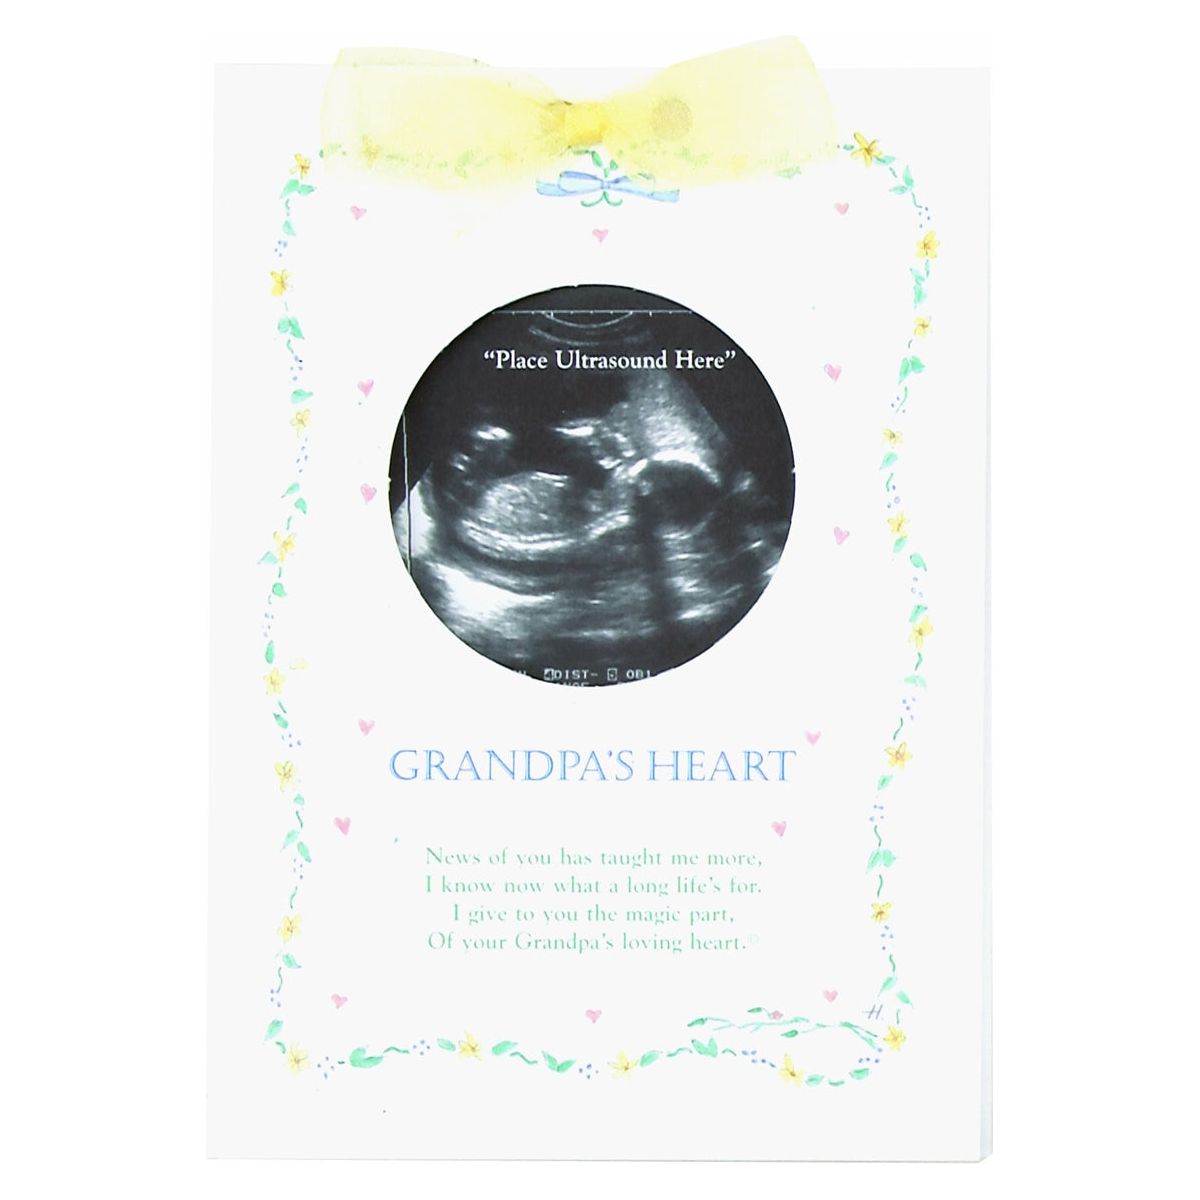 5x7 Grandpa&#39;s Heart greeting card with new baby poem, yellow organza accent ribbon, and circular opening for baby&#39;s ultrasound picture.